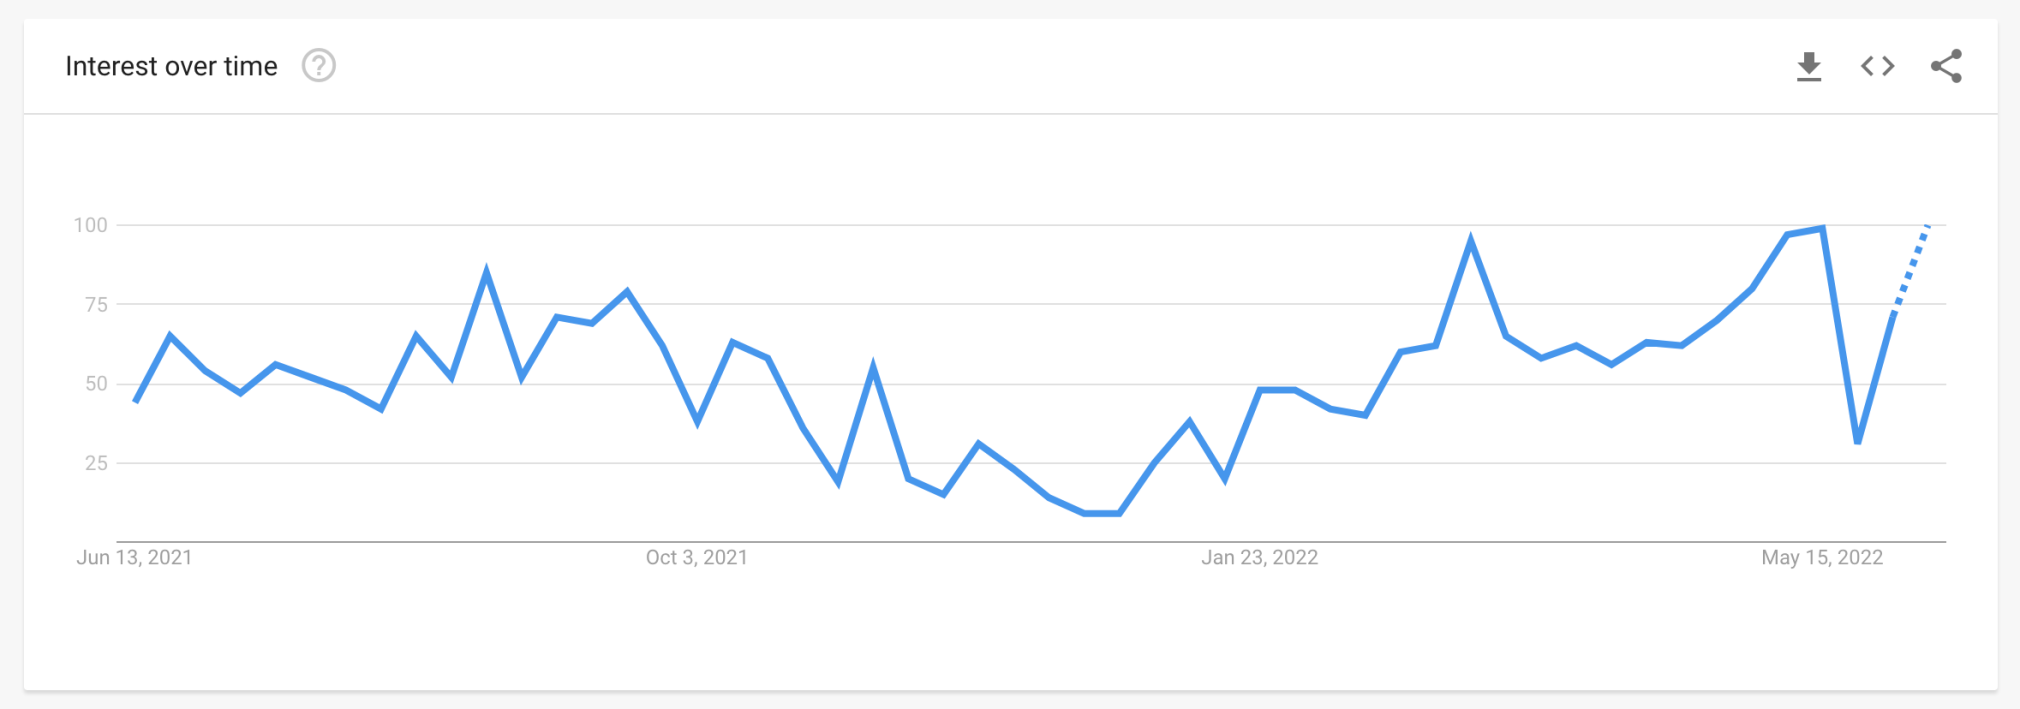 Interest over time for "wedding guest dresses"